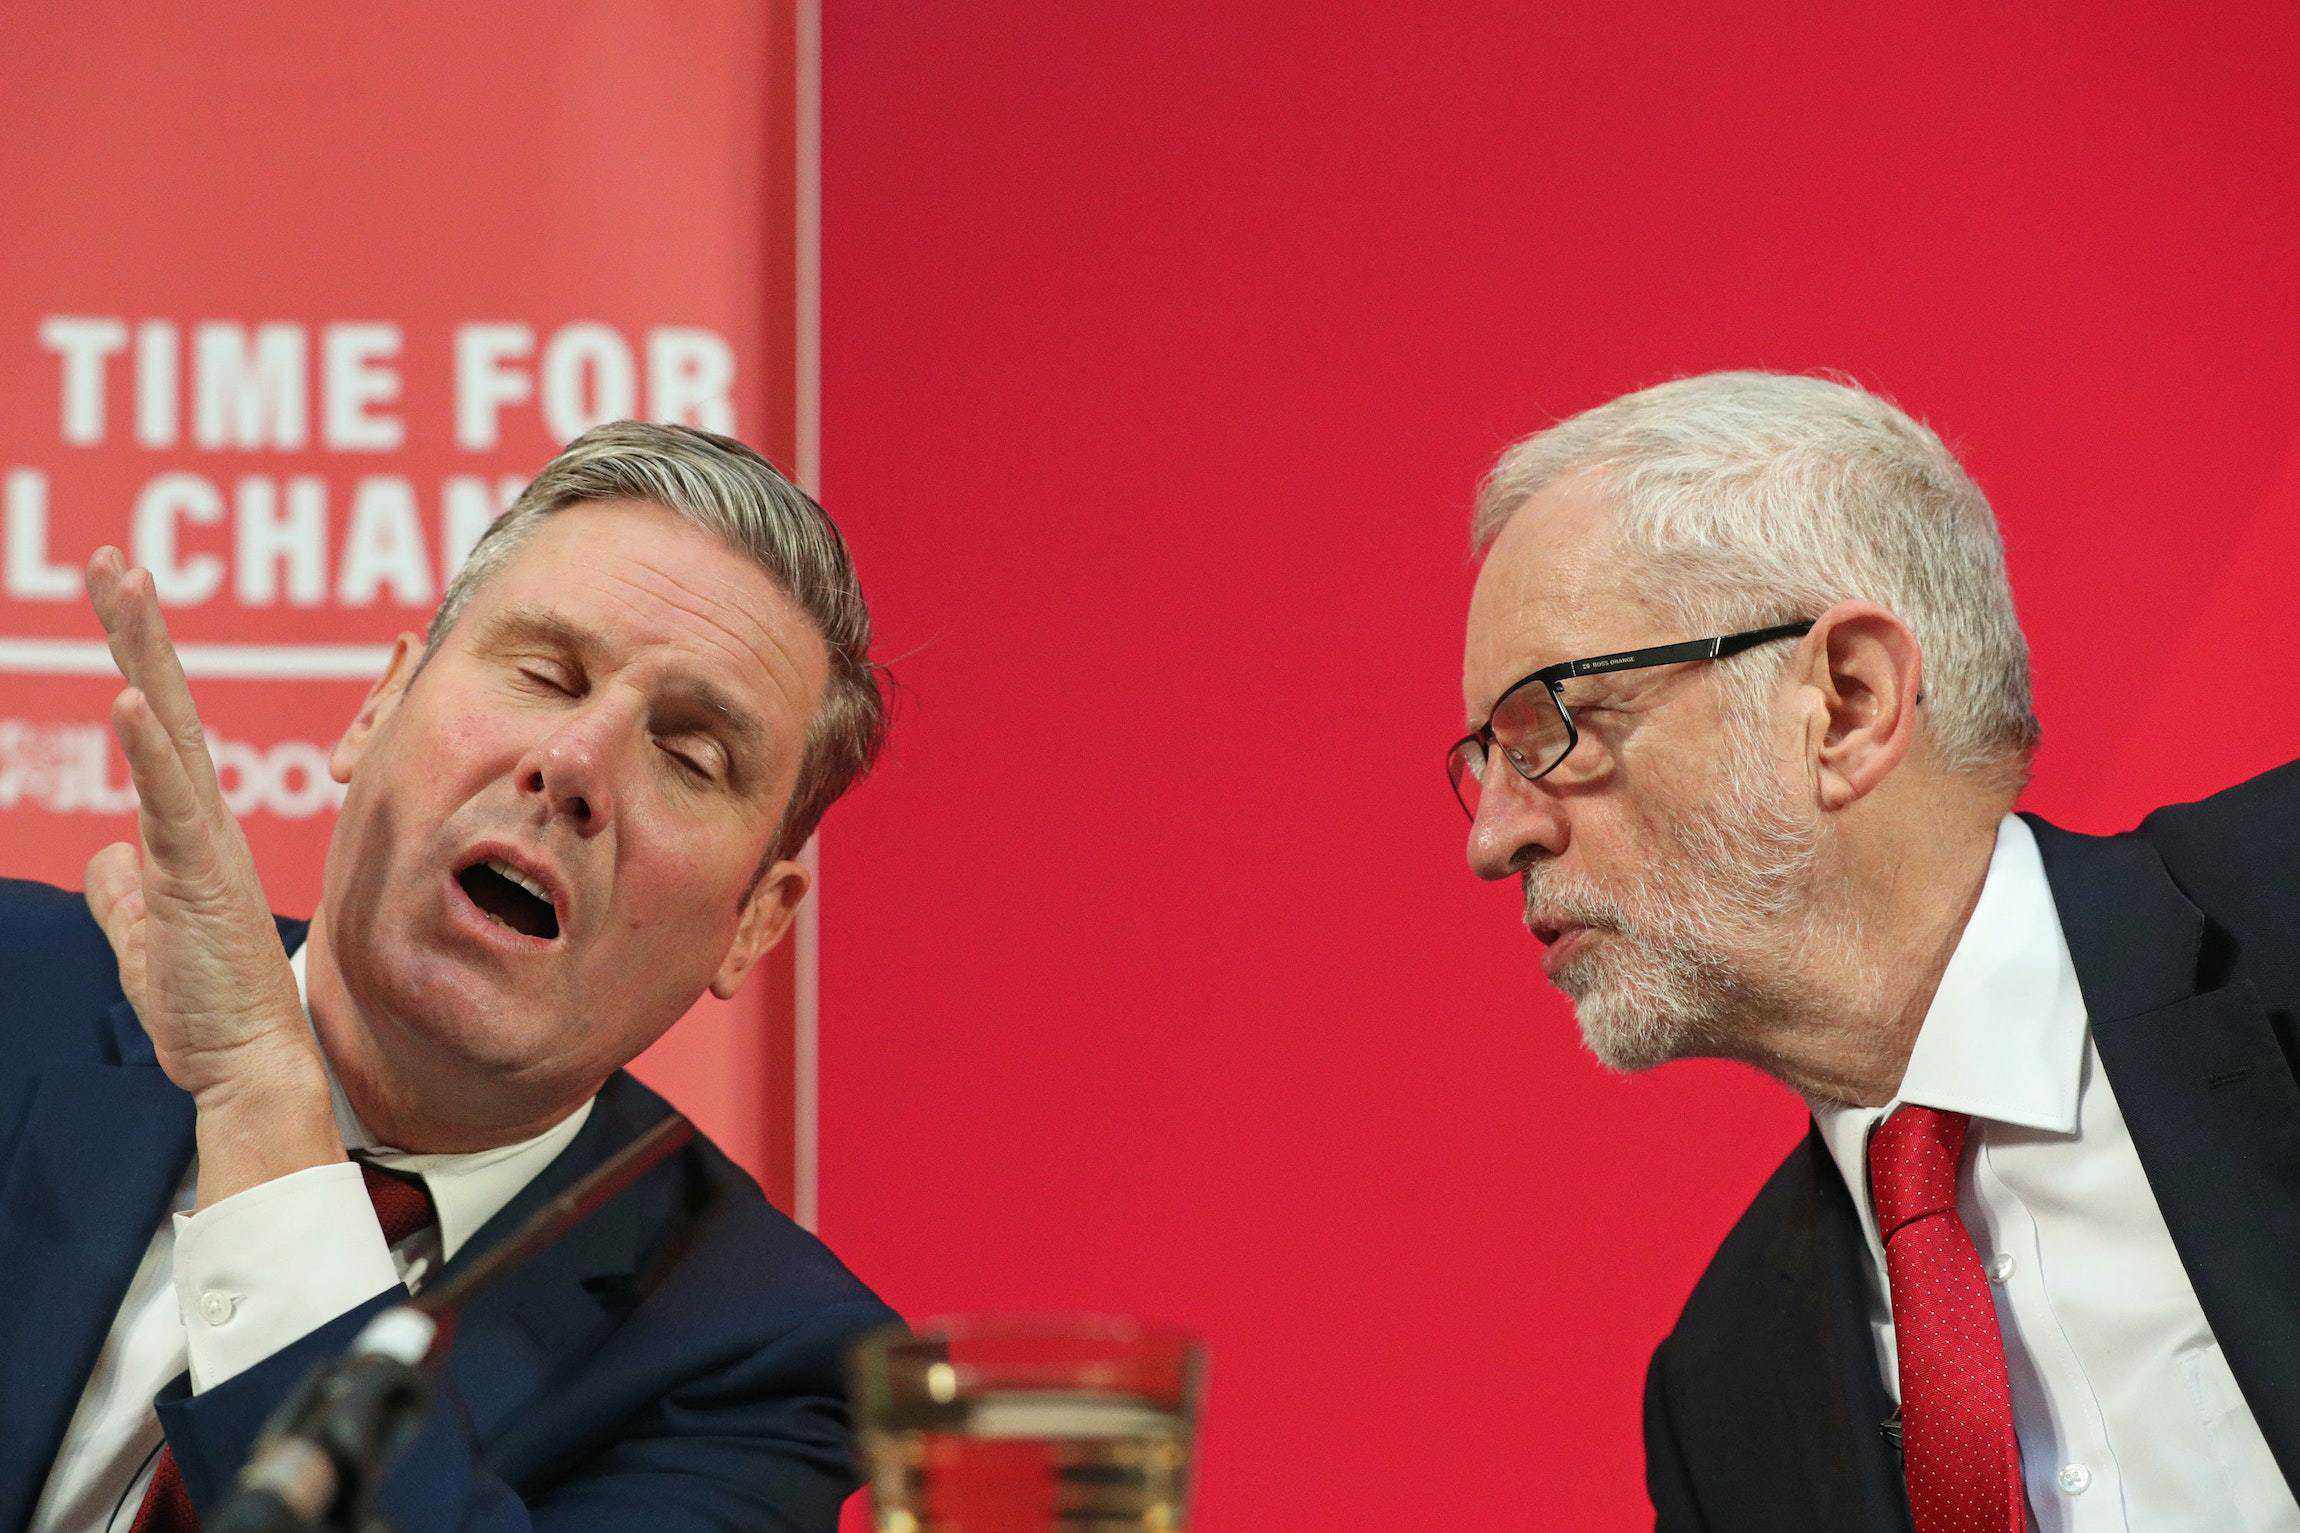 Starmer refuses to let Corbyn sit as Labour MP, sparking uproar on the left